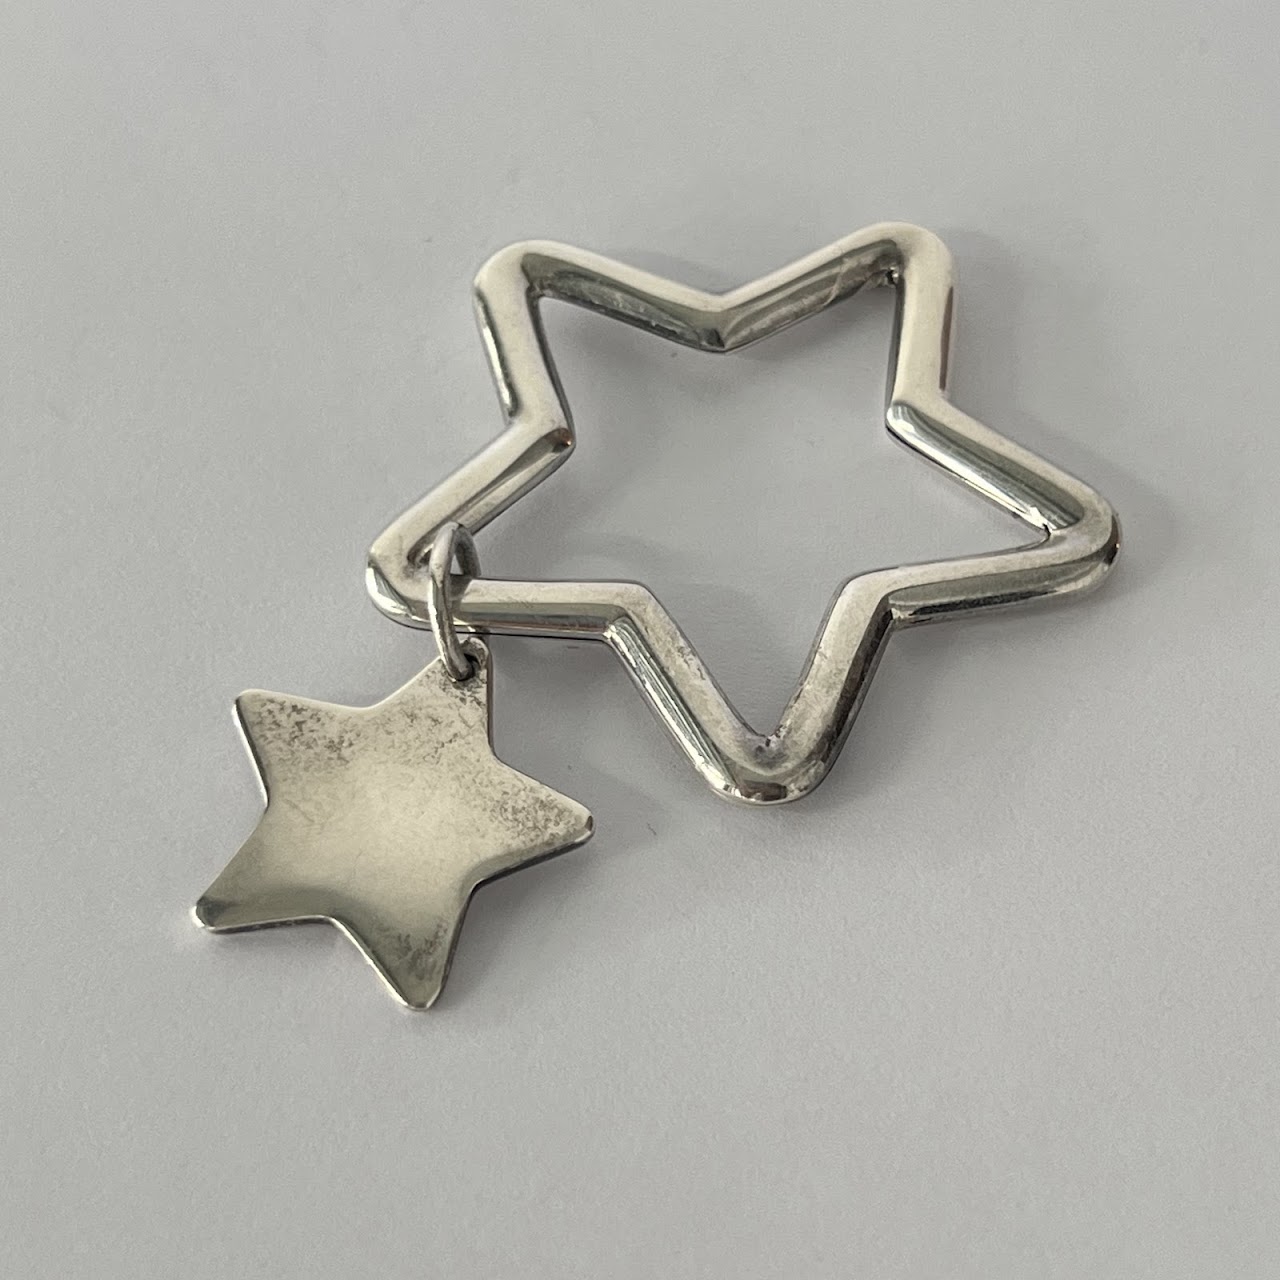 Tiffany & Co. Sterling Silver Double Star Keychain